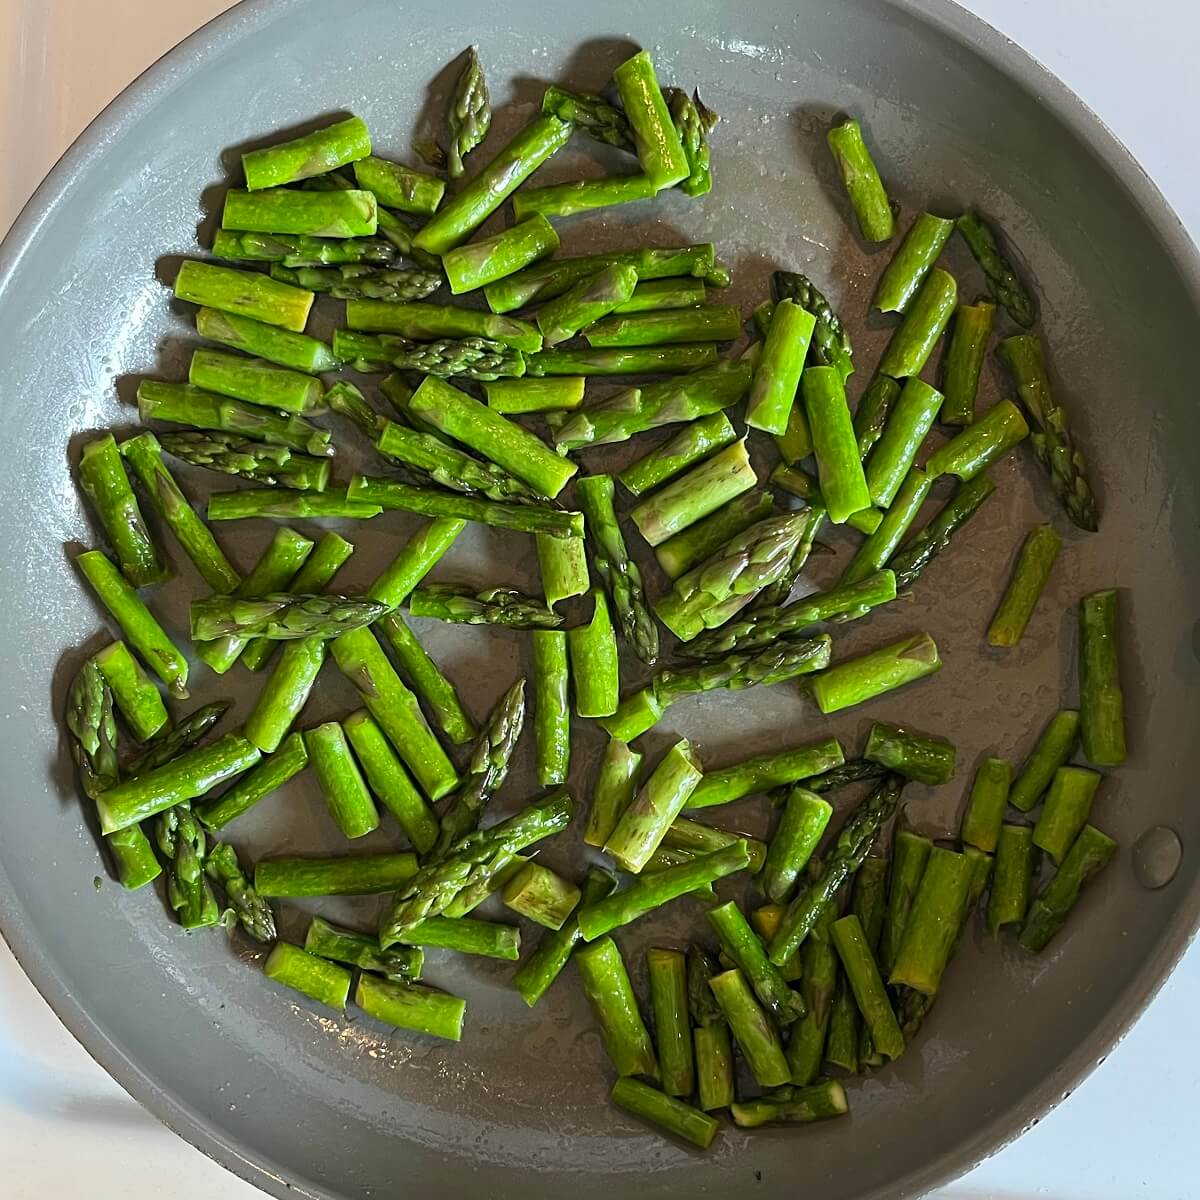 Chopped asparagus in a frying pan.